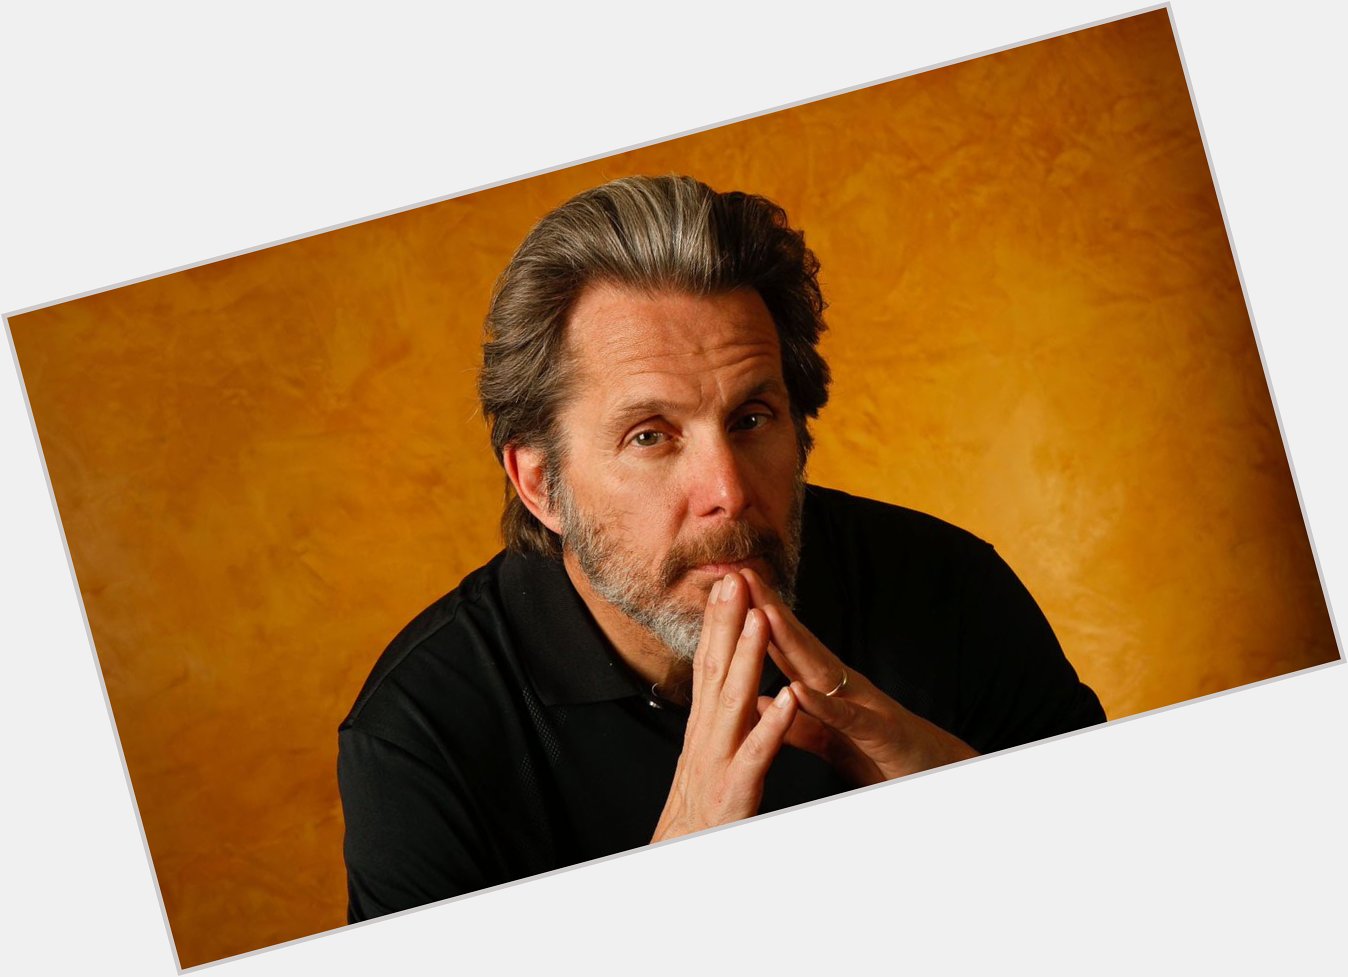 September 20, 2020
Happy birthday to American actor Gary Cole 64 years old. 